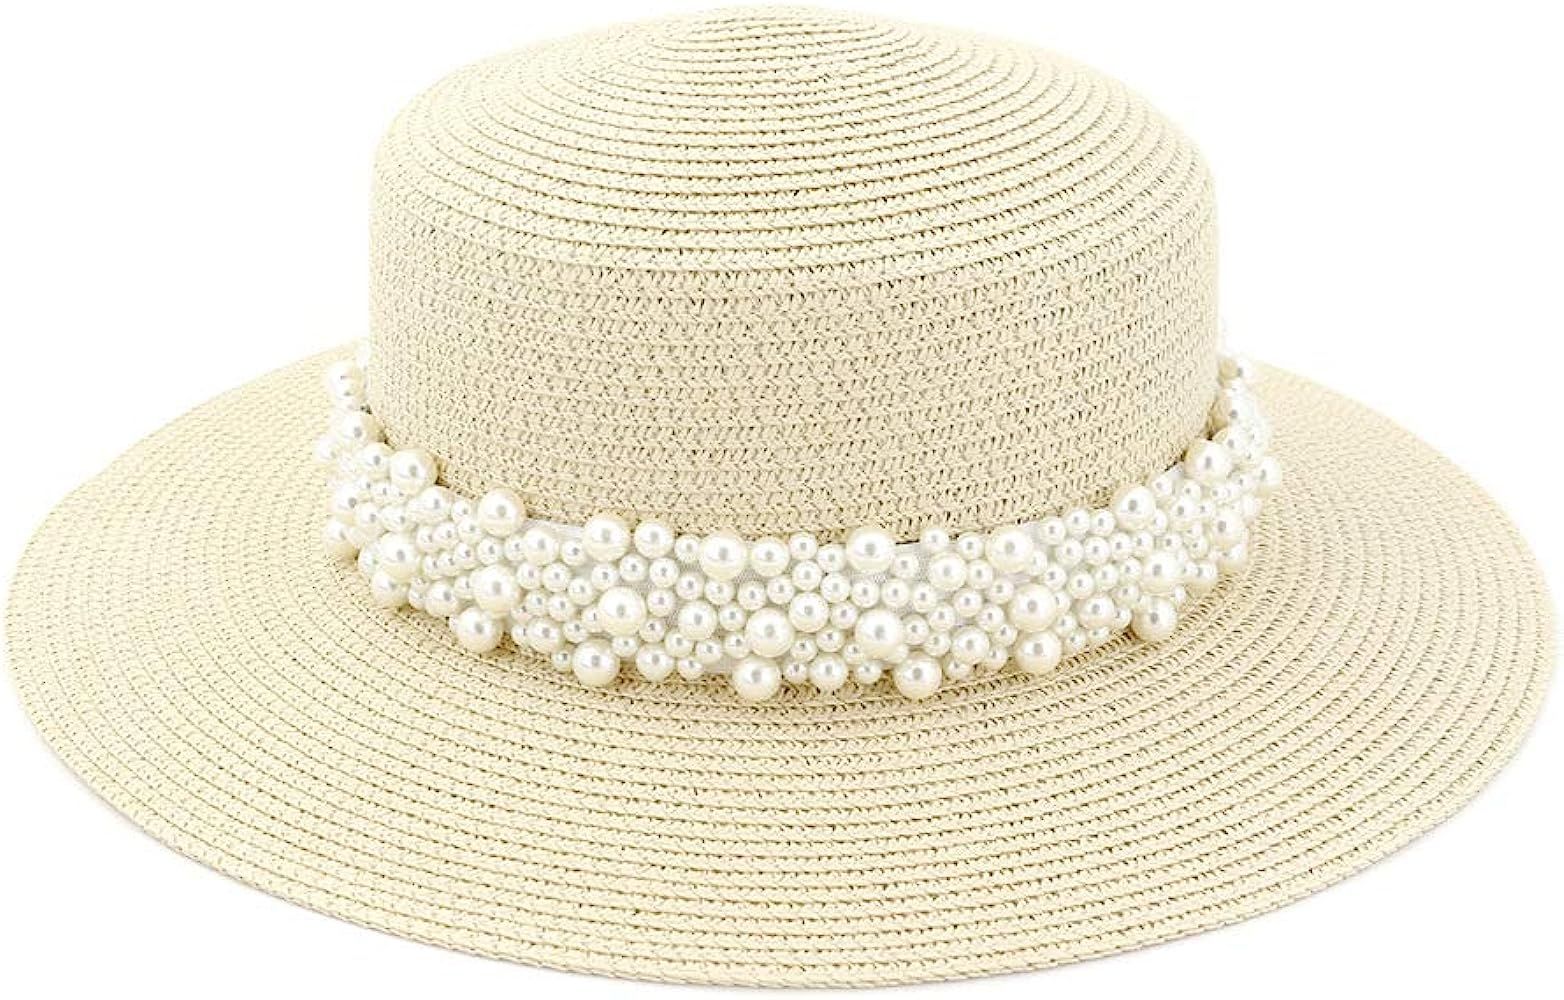 ADAHOP Women Boater Straw Hat Outdoor Seaside Beach Sun Flat Top Sun Caps with Wide Pearl Decoration | Amazon (US)